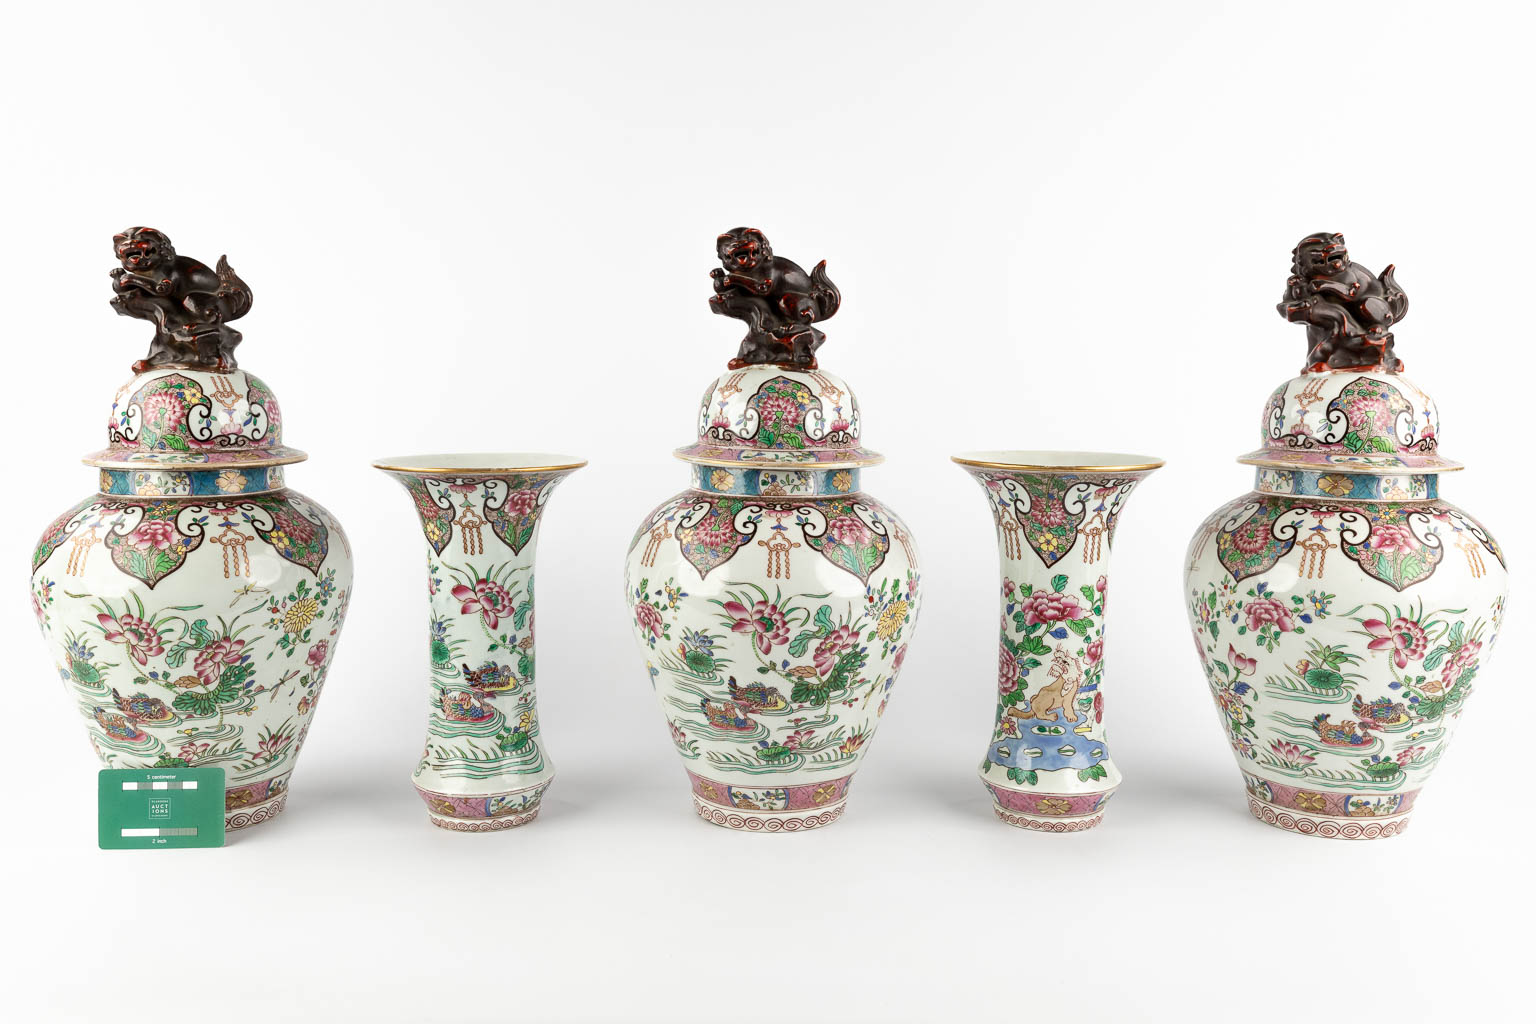 Samson, a 5-piece Kaststel, vases with lid and trumpet vases. Chinoiserie decor. (H:43 x D:21 cm)